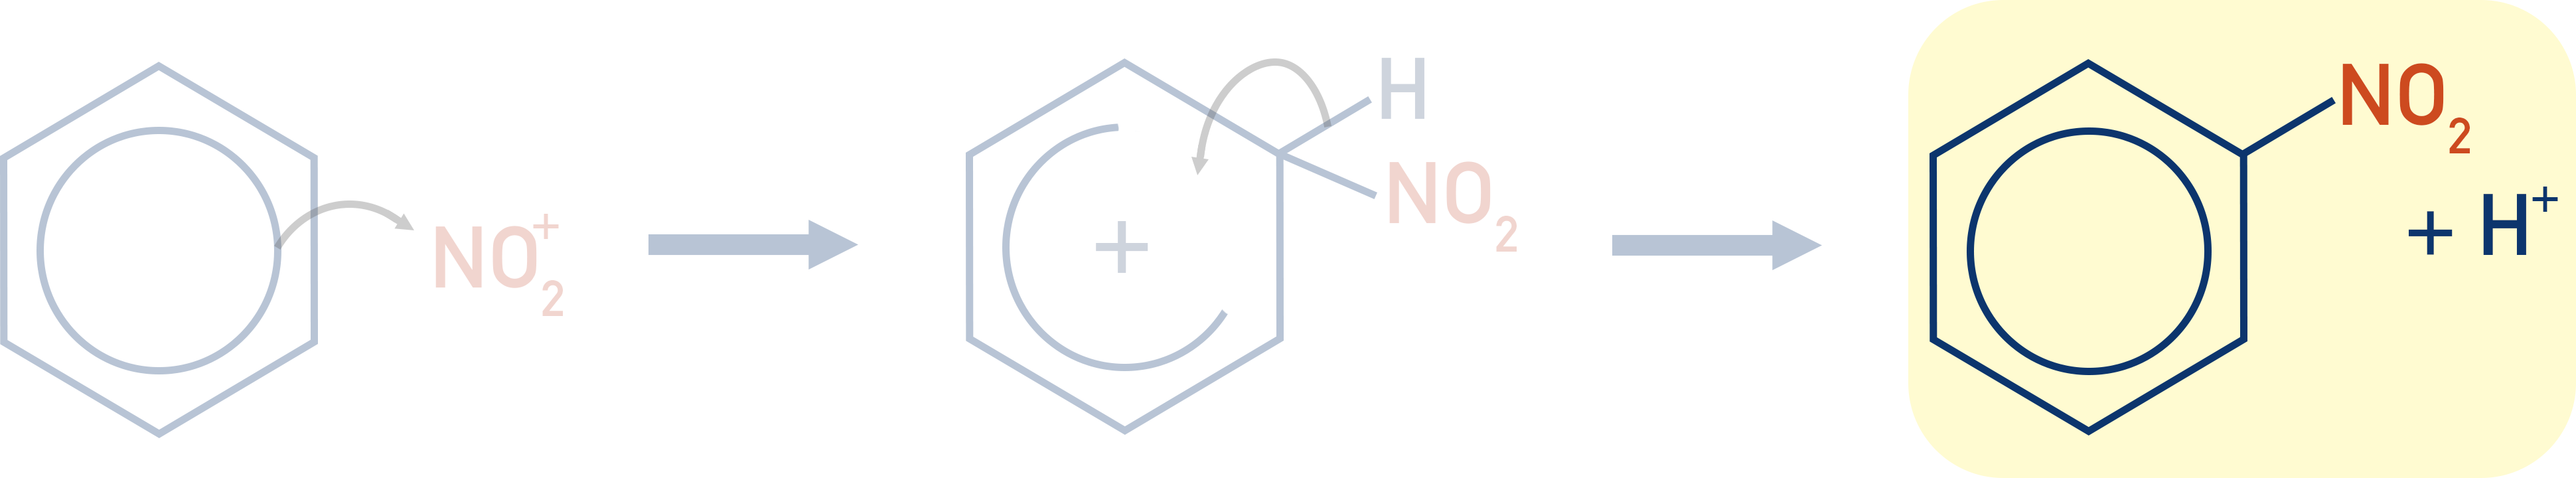 nitration of benzene mechanism product electrophilic substitution